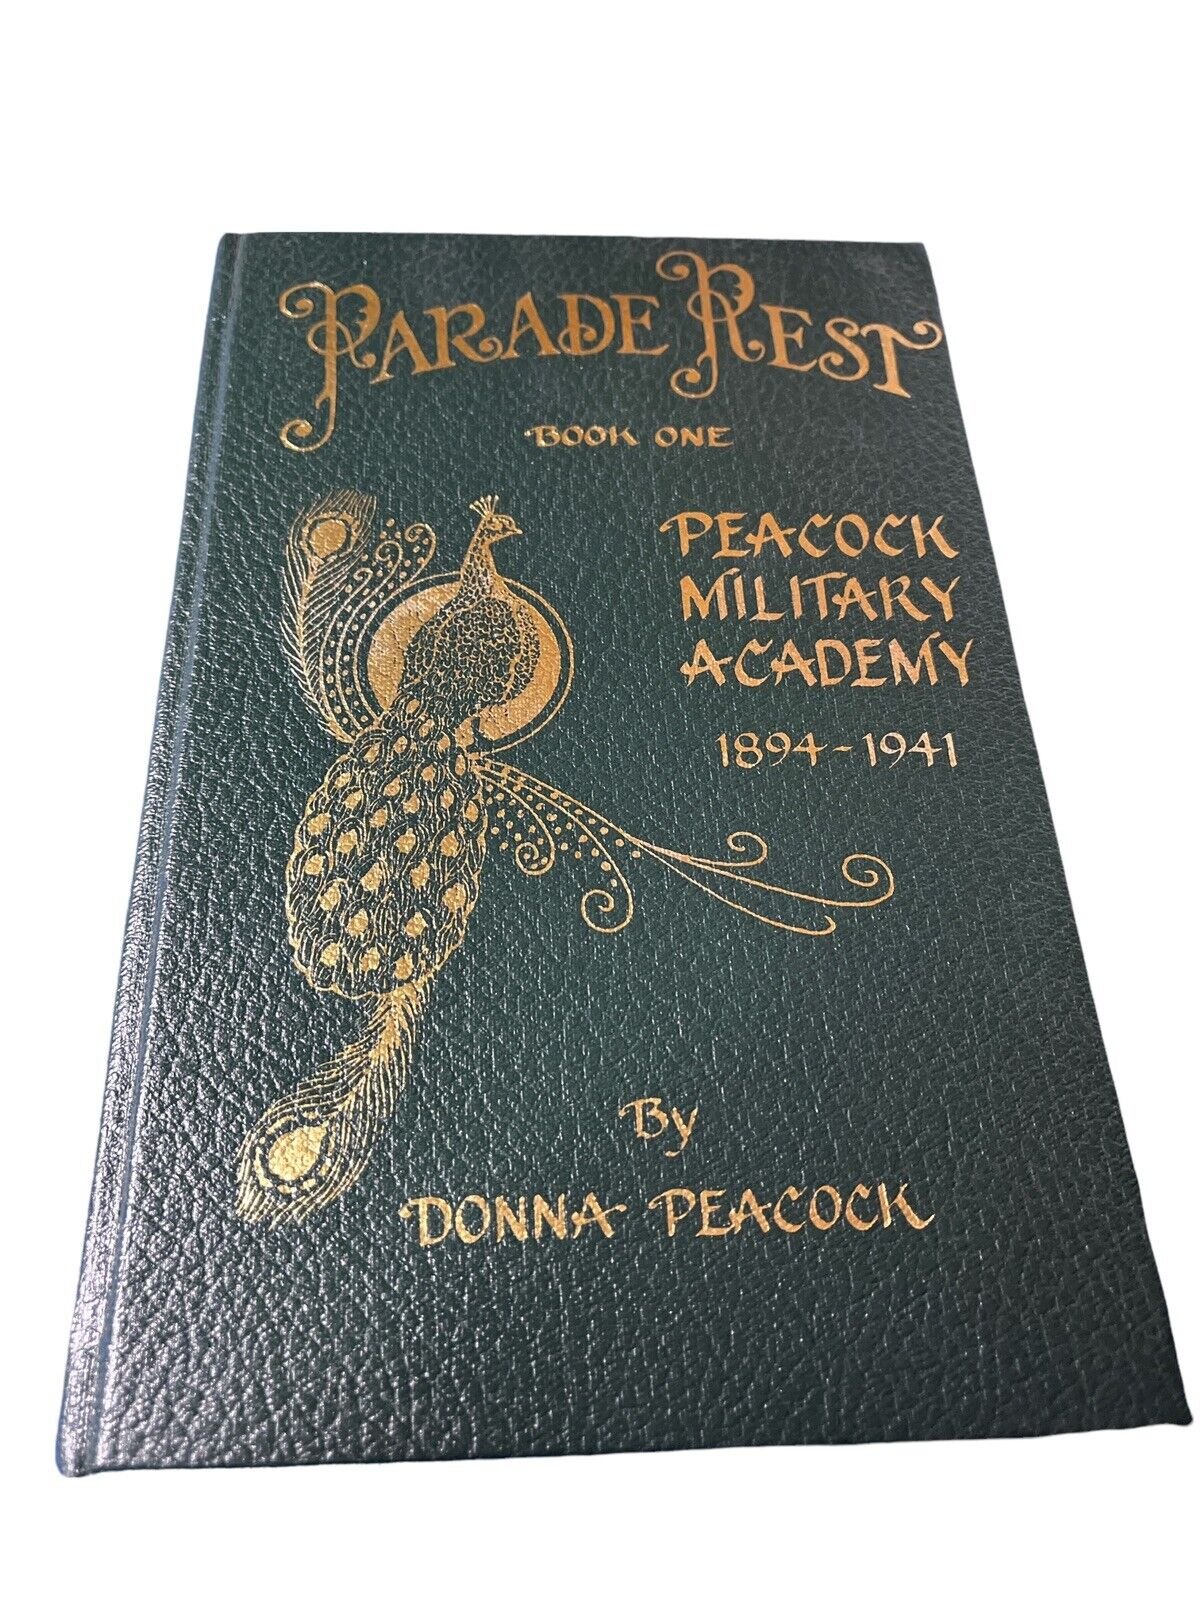 Peacock Military Academy Parade Rest Bk 1 1894-1941 San Antonio SIGNED by Author